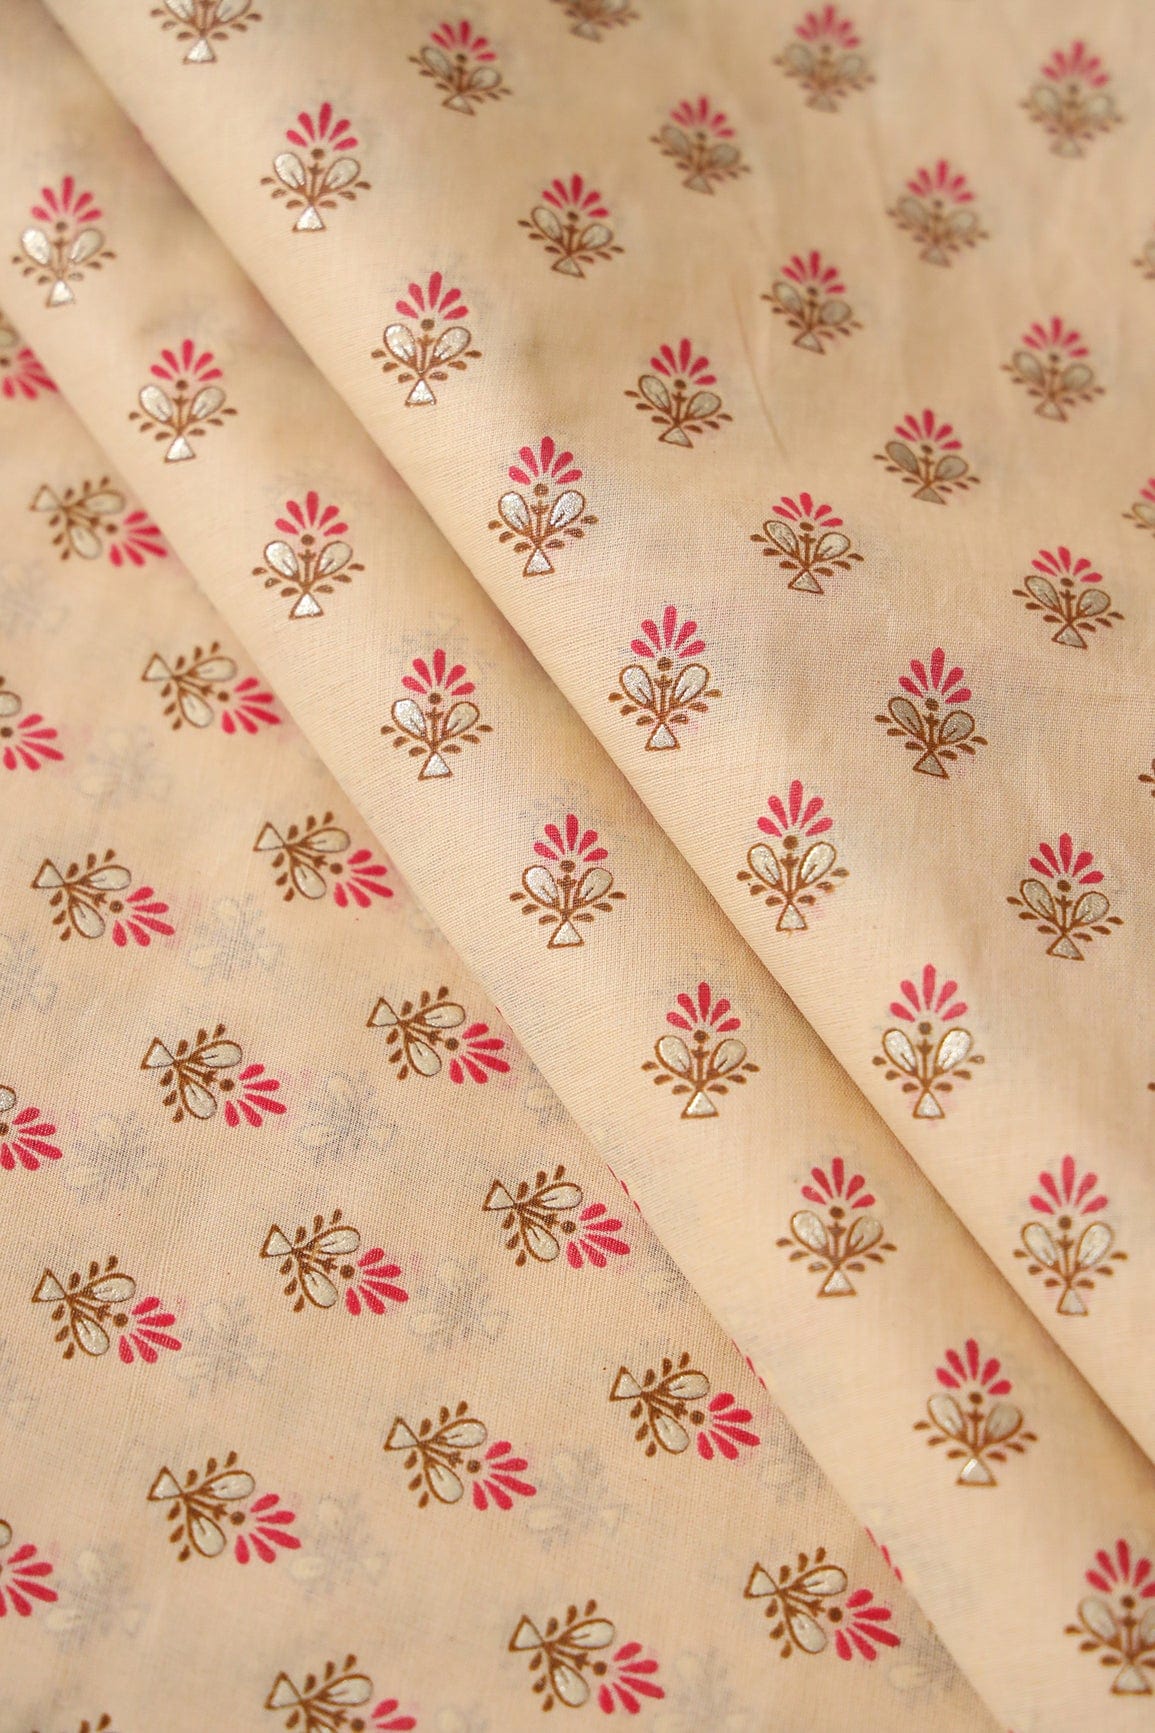 doeraa Prints Dark Pink And Brown Small Floral Booti Foil Print On Beige Organic Cotton Fabric